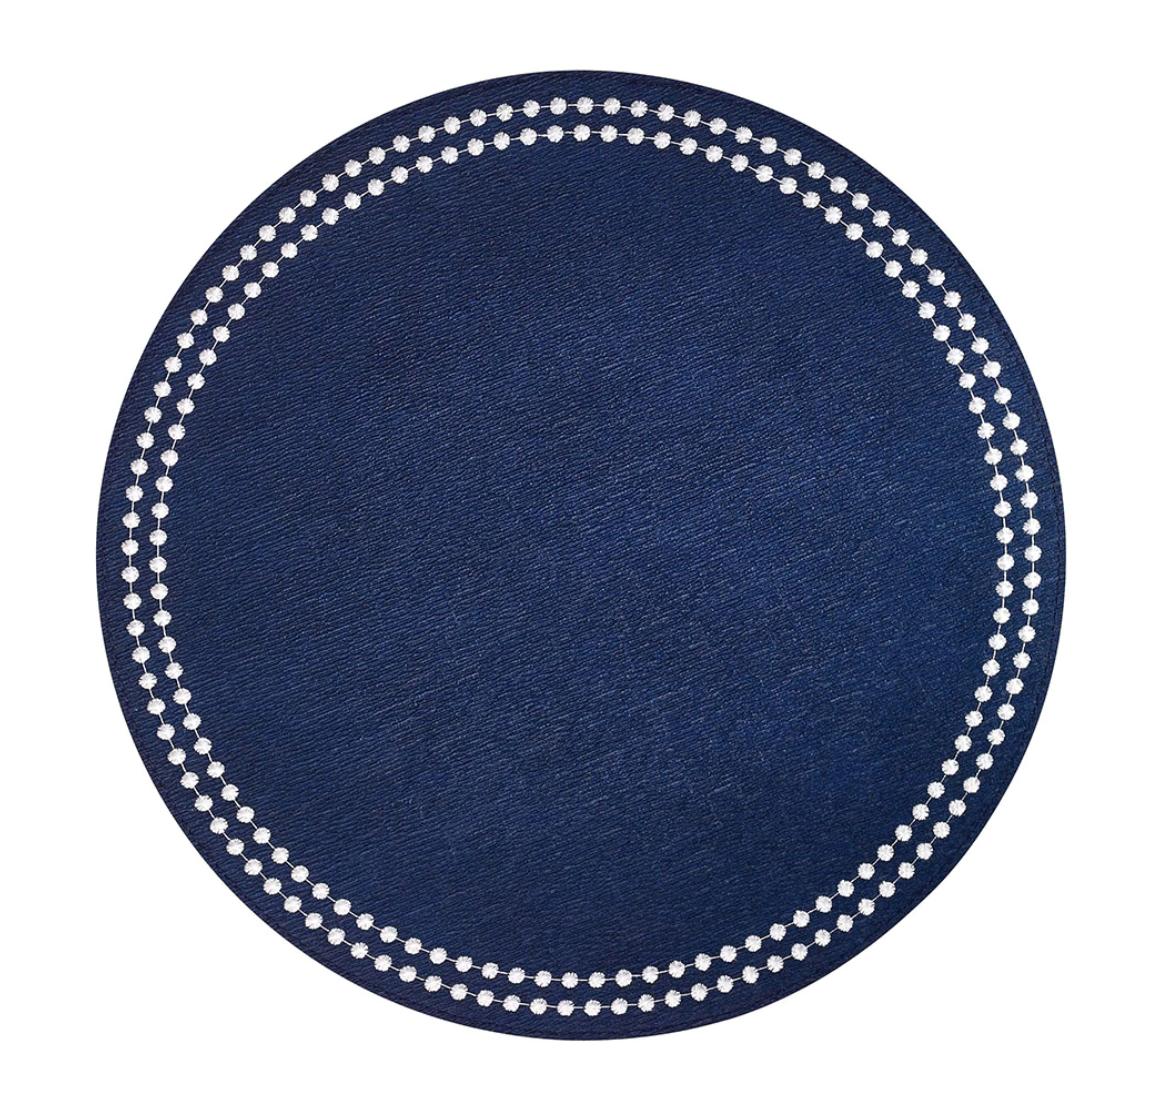 Bodrum Staples-Lux Pearls Navy & White Placemats | Set of 4 